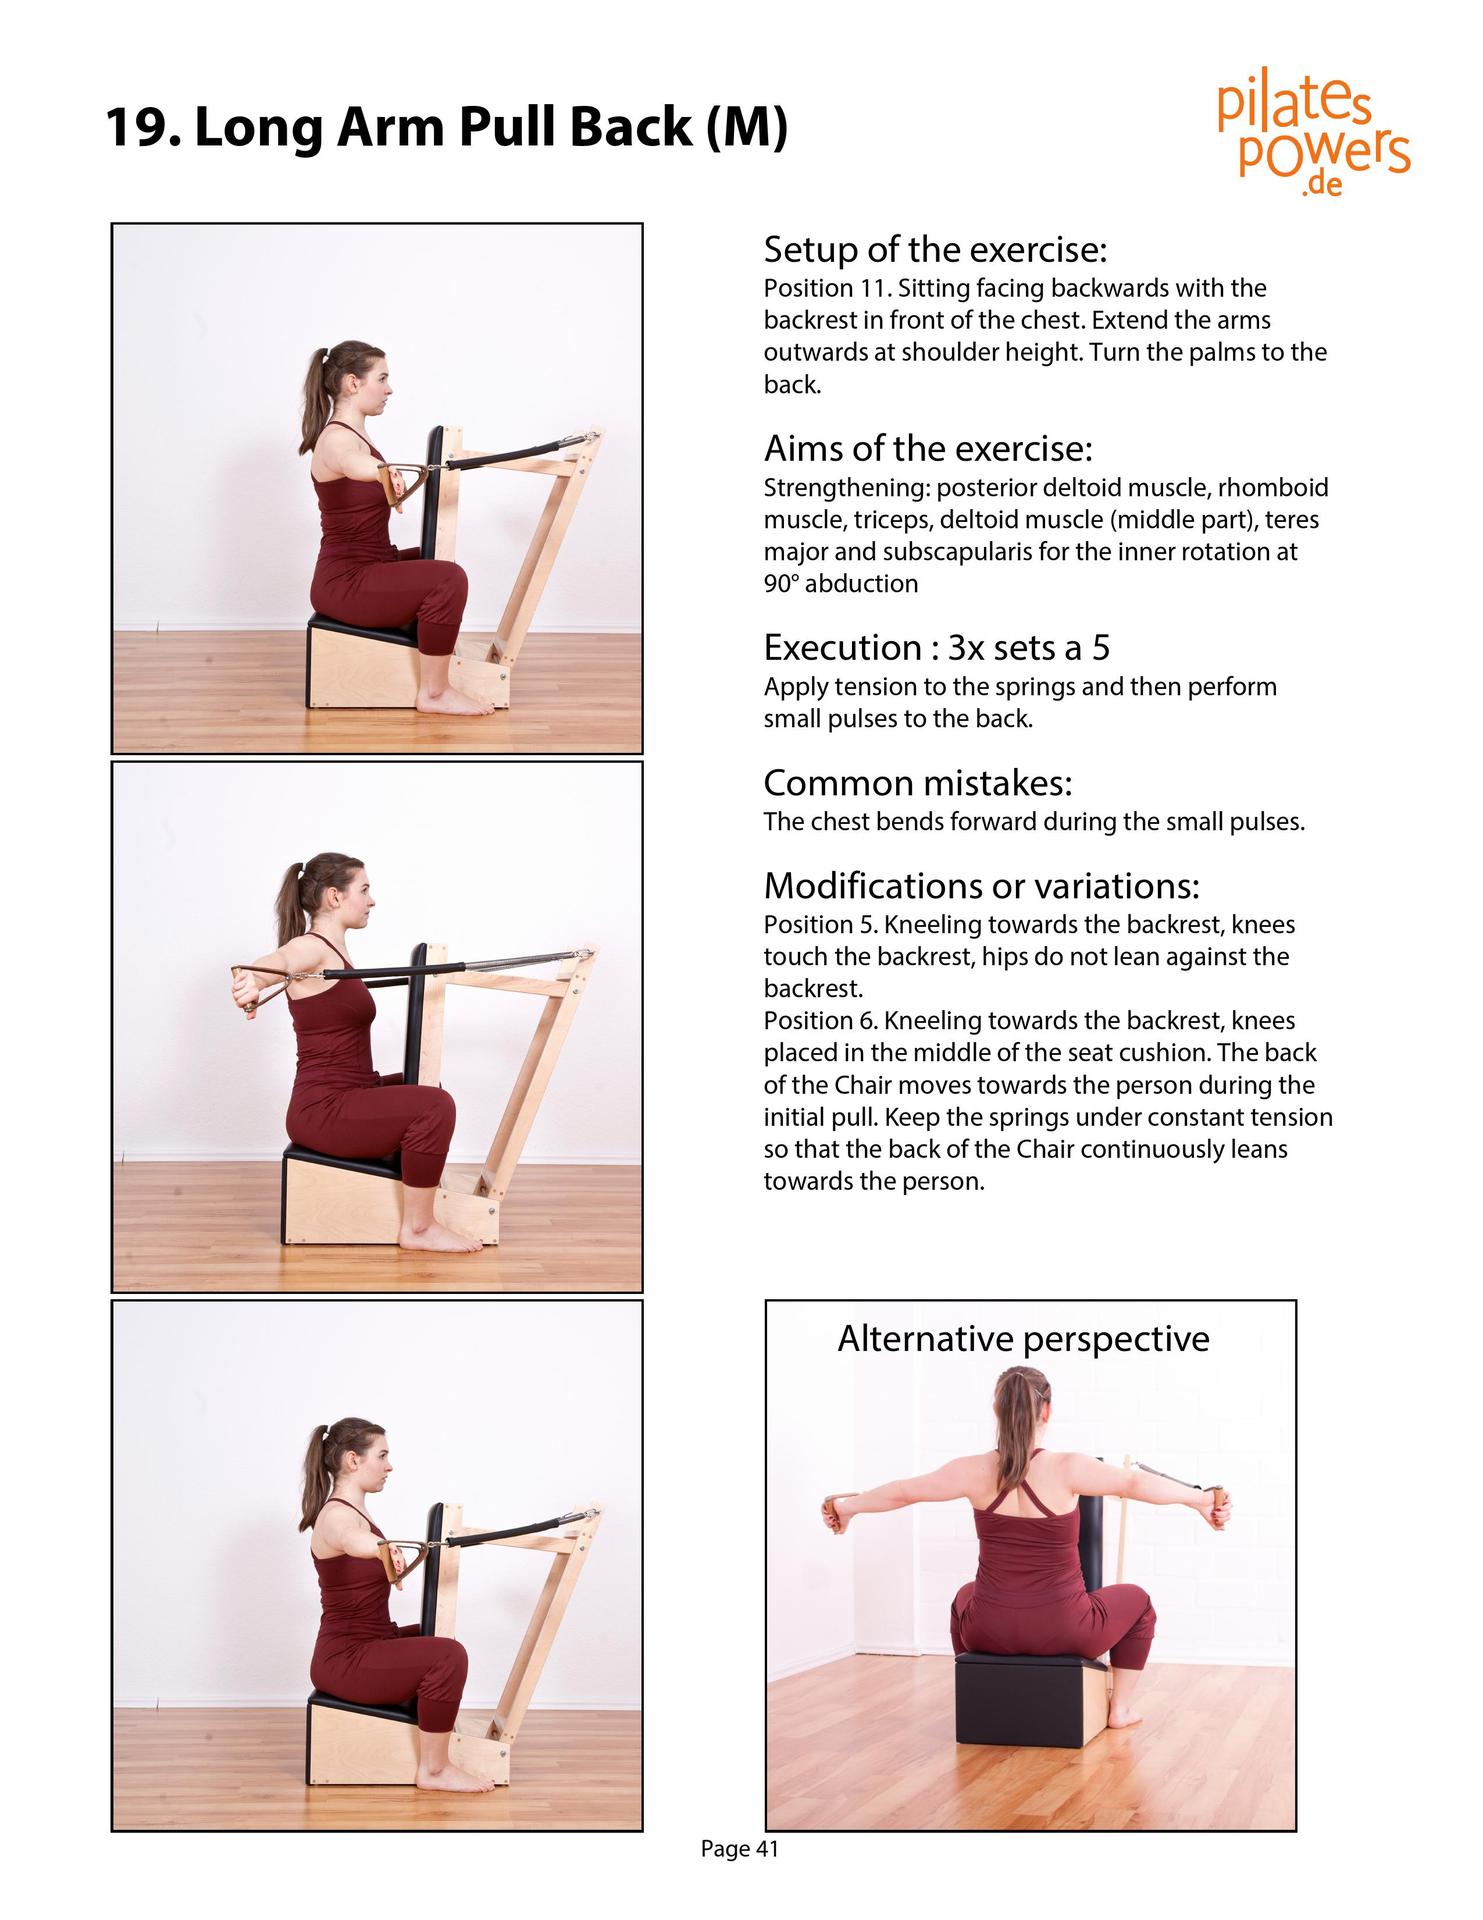 The Pilates Arm Chair The 42 most effective exercises - photo 41